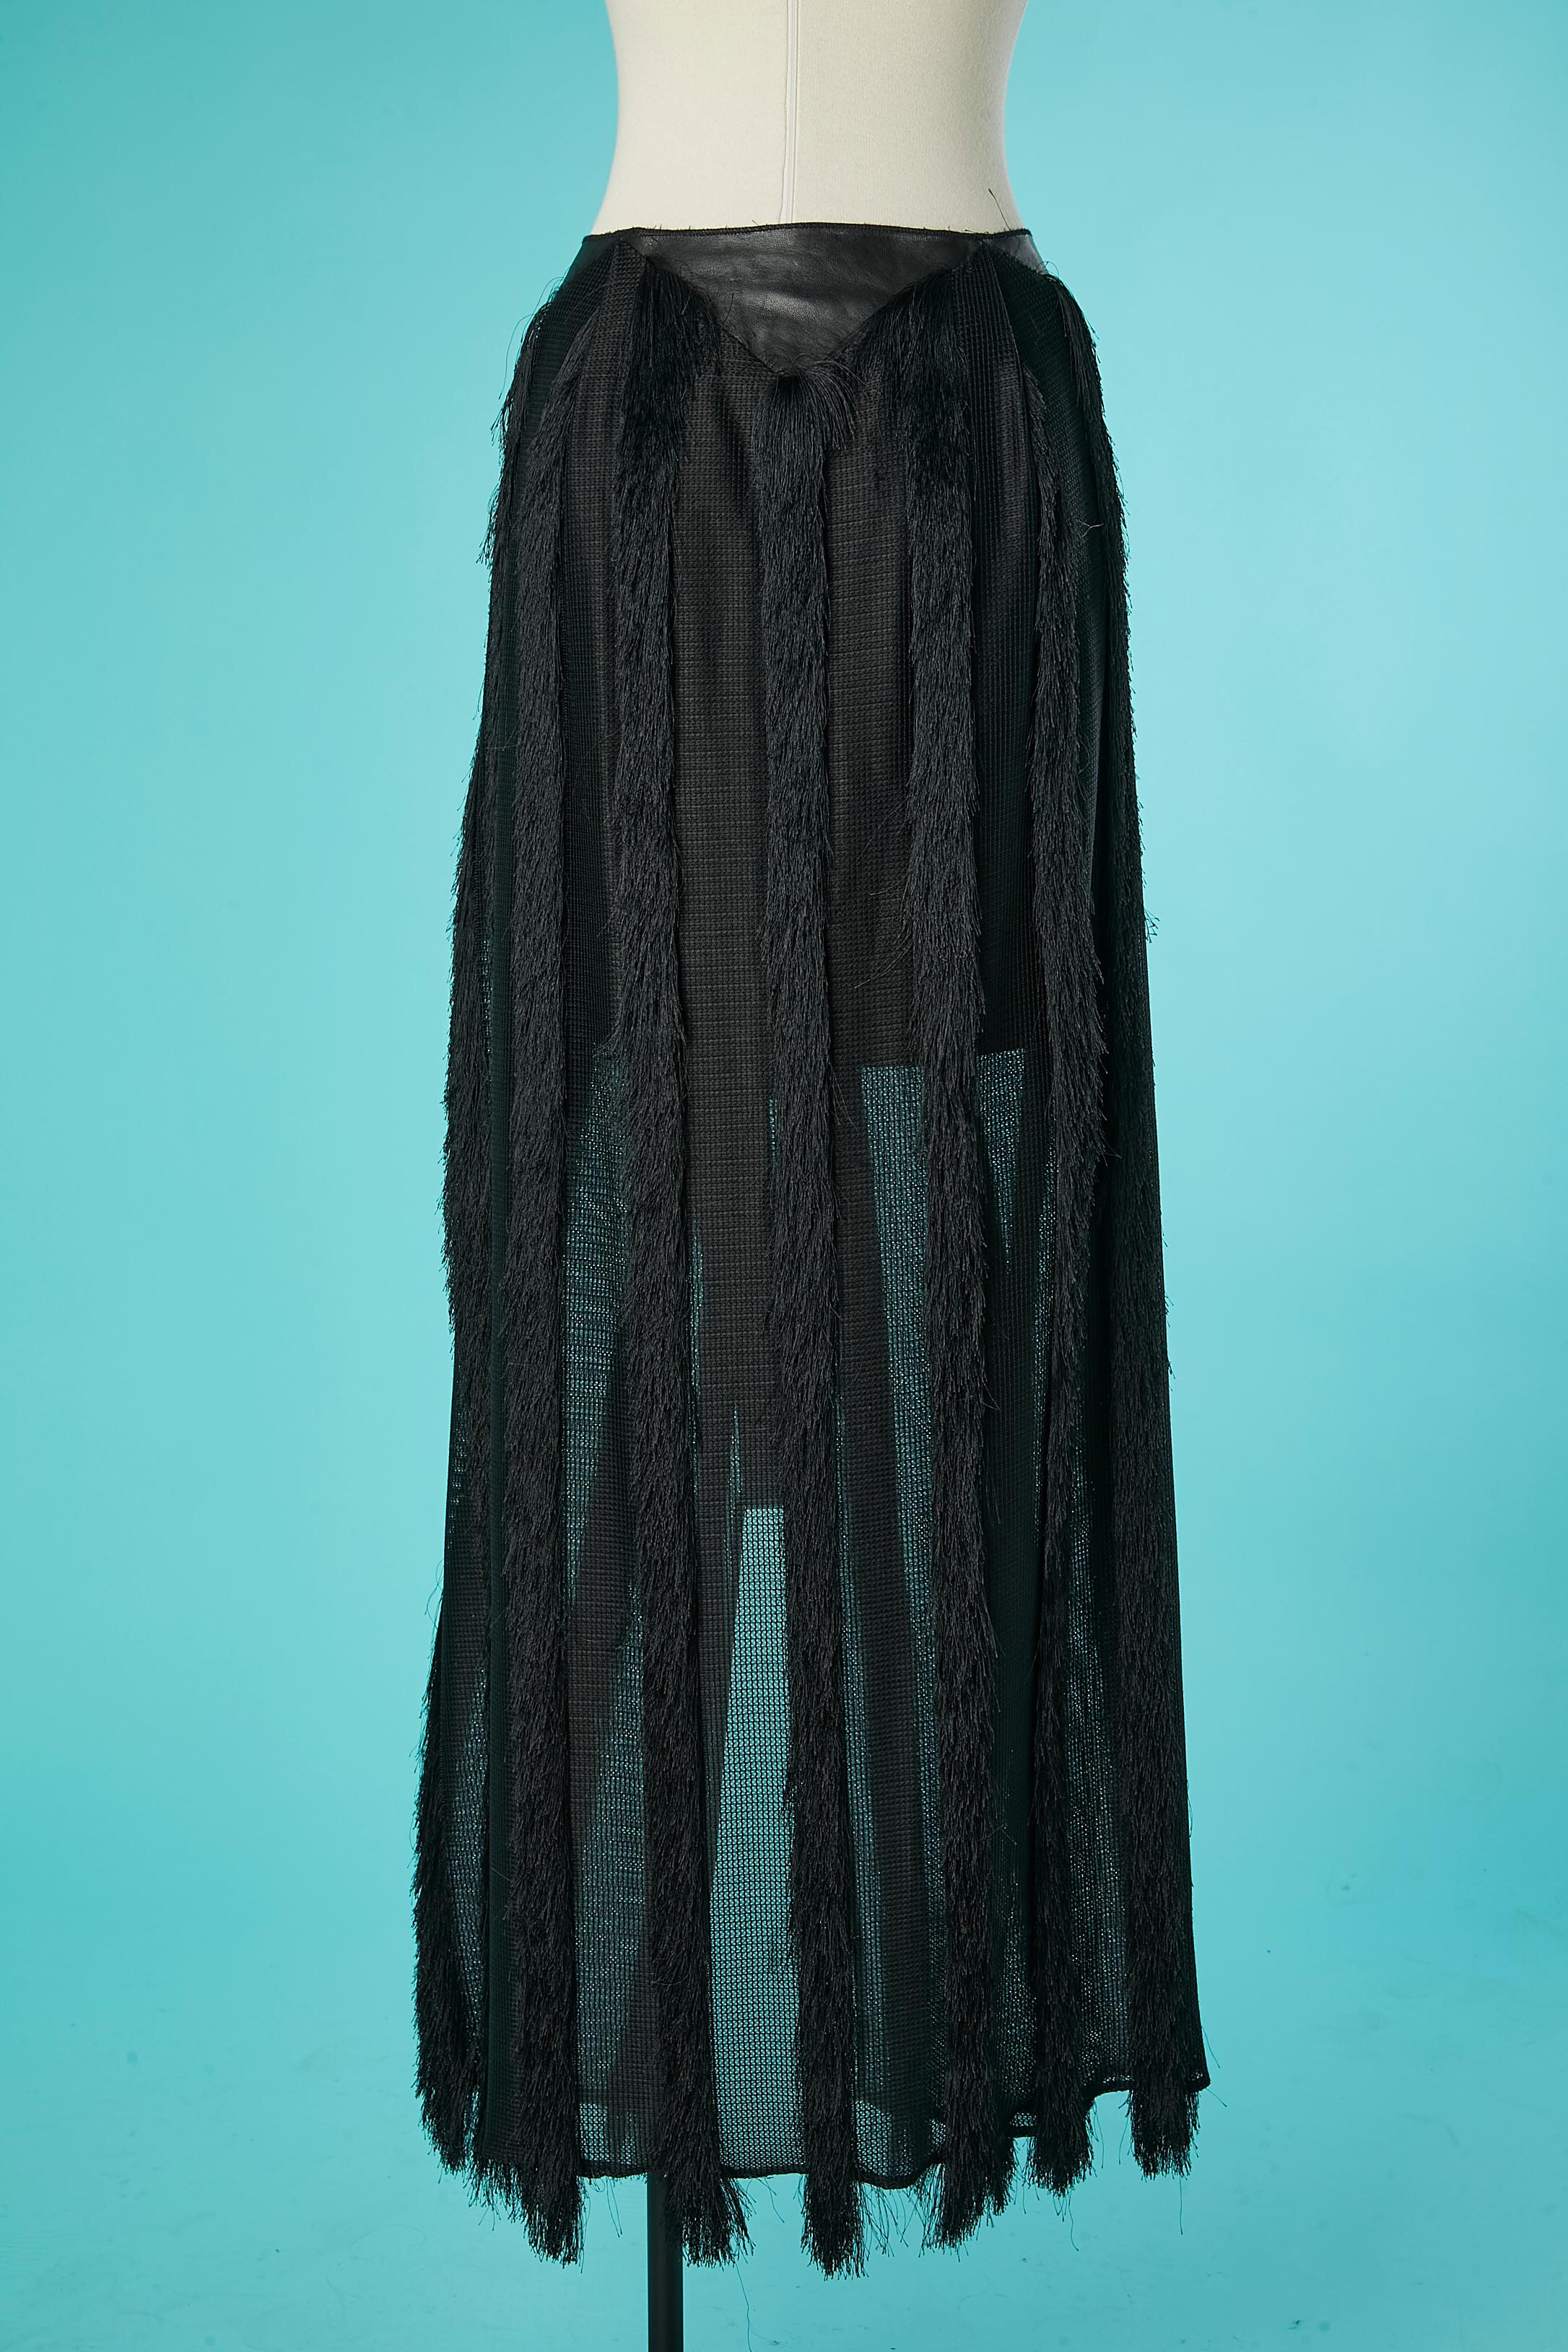 Black long skirt made of leather, soft tulle and threads fringes Augustin Teboul For Sale 1